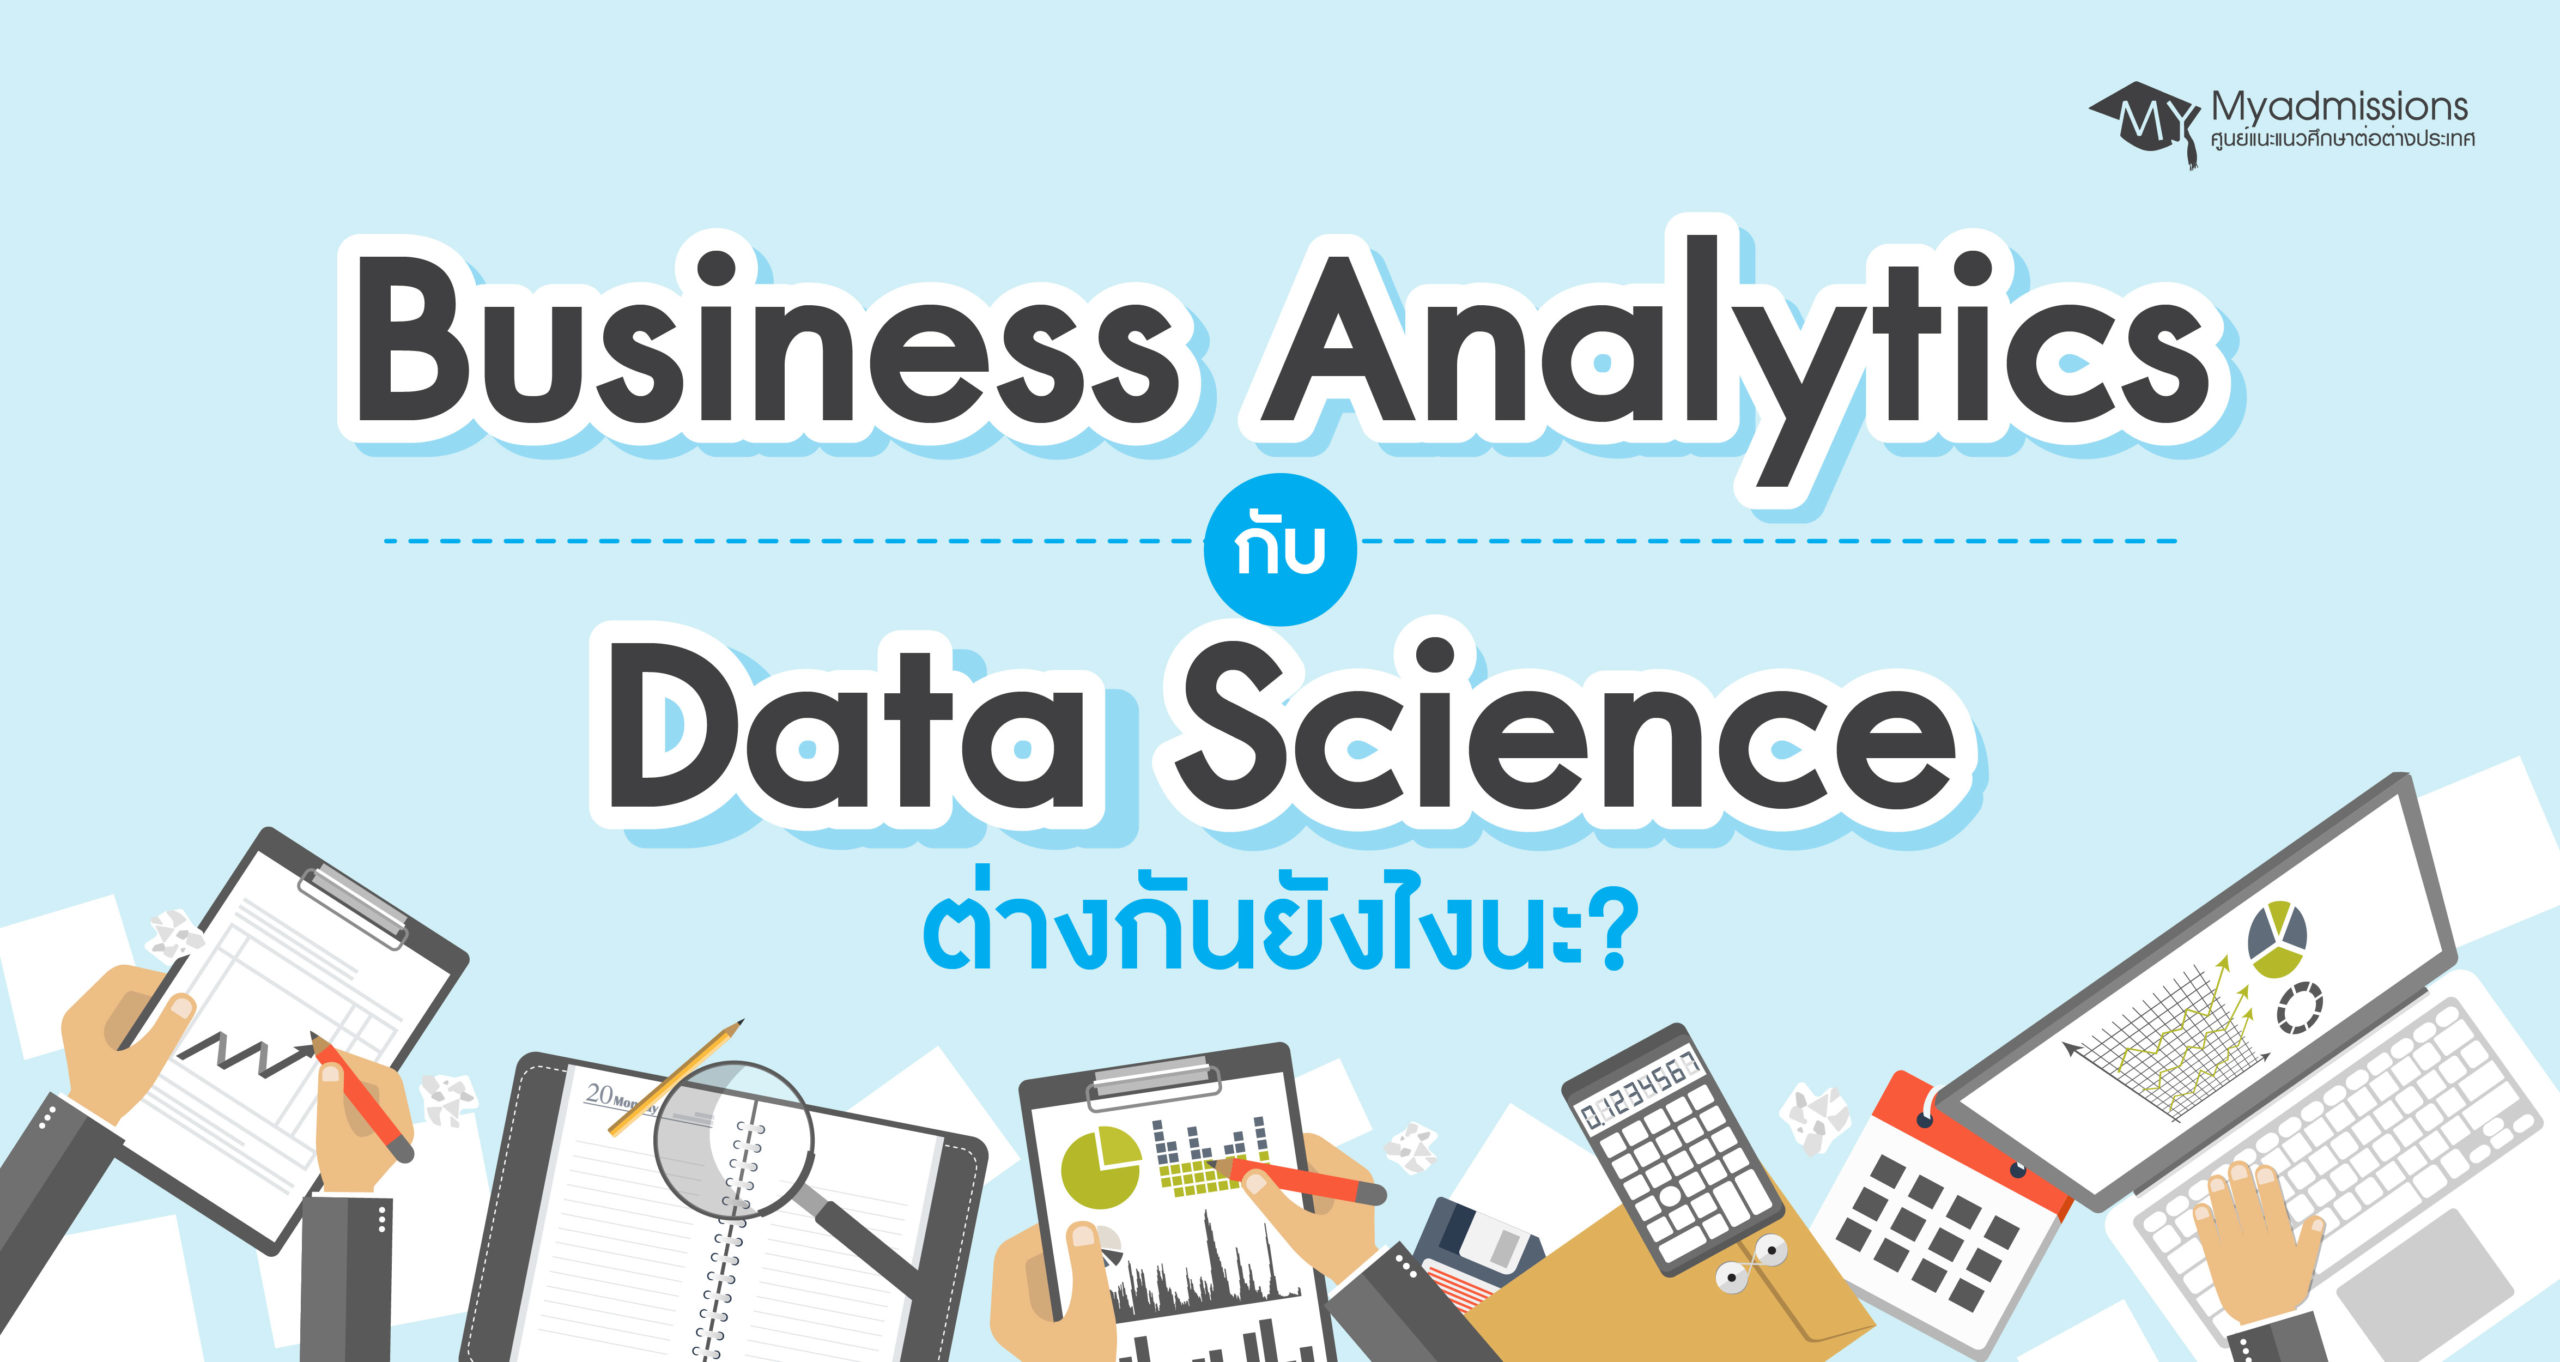 university of texas at austin data science and business analytics